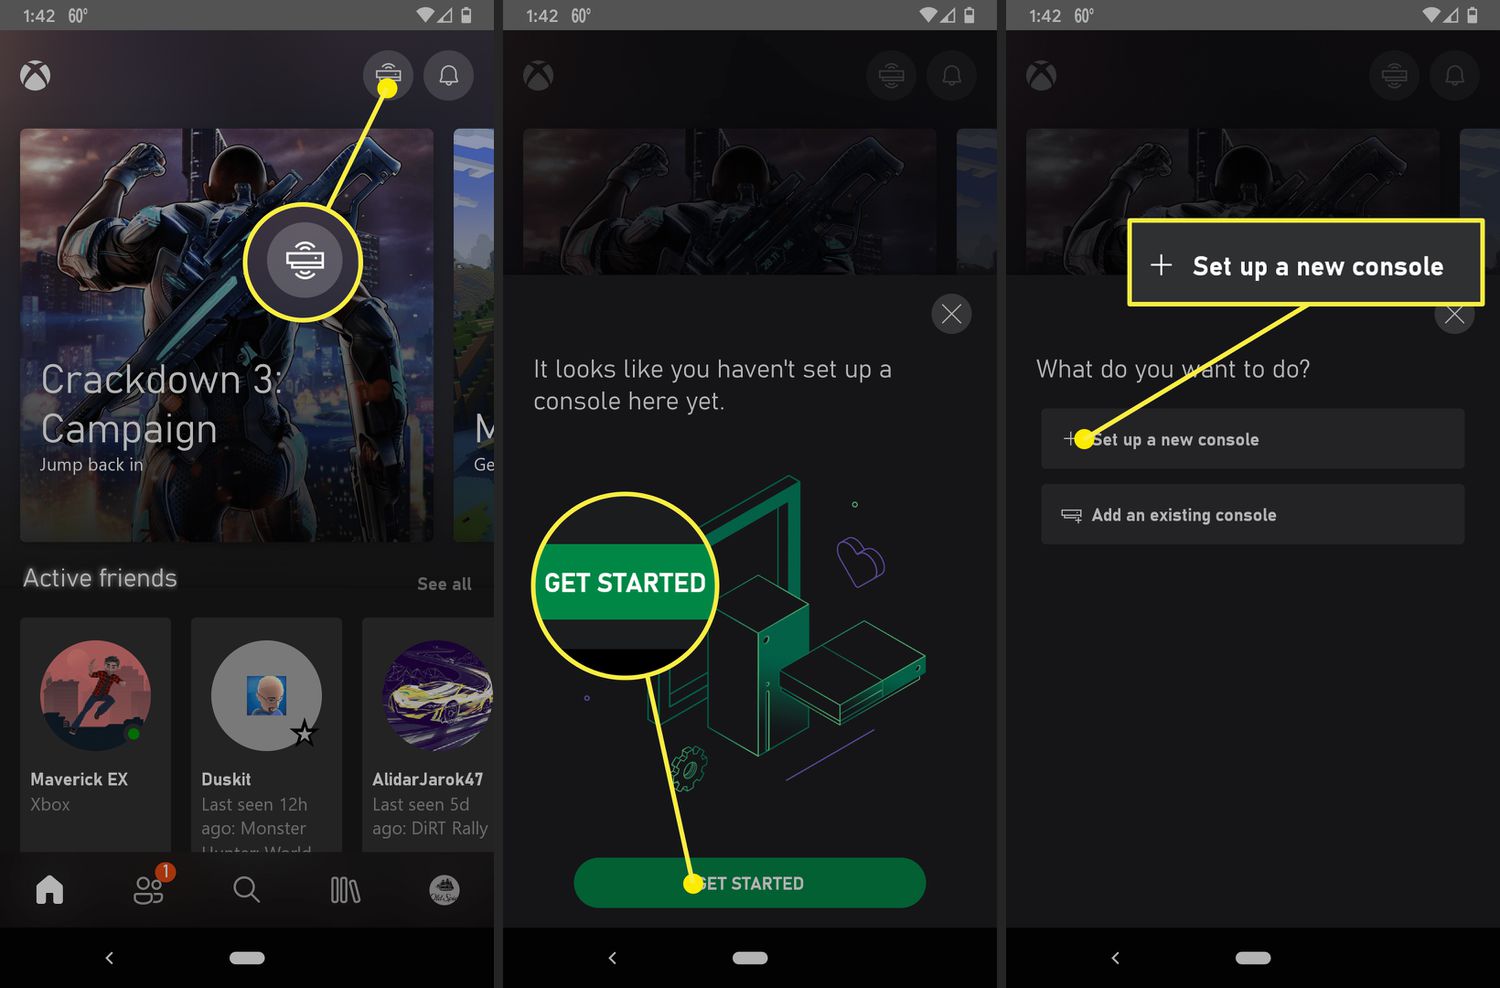 How to Connect Xbox to Xbox App?